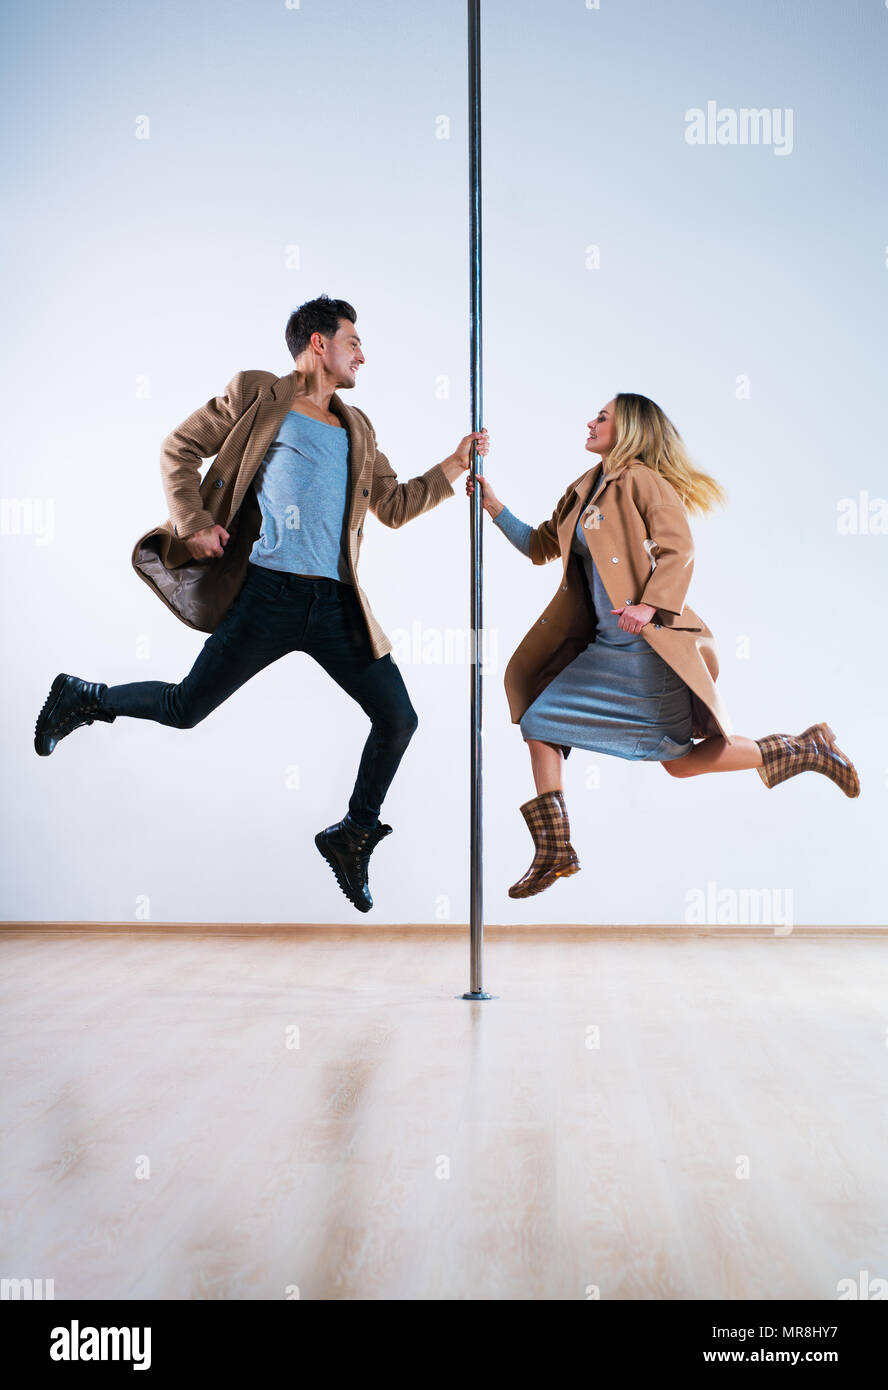 Young man and woman pole dancers in casual autumn clothing jumping Stock Photo